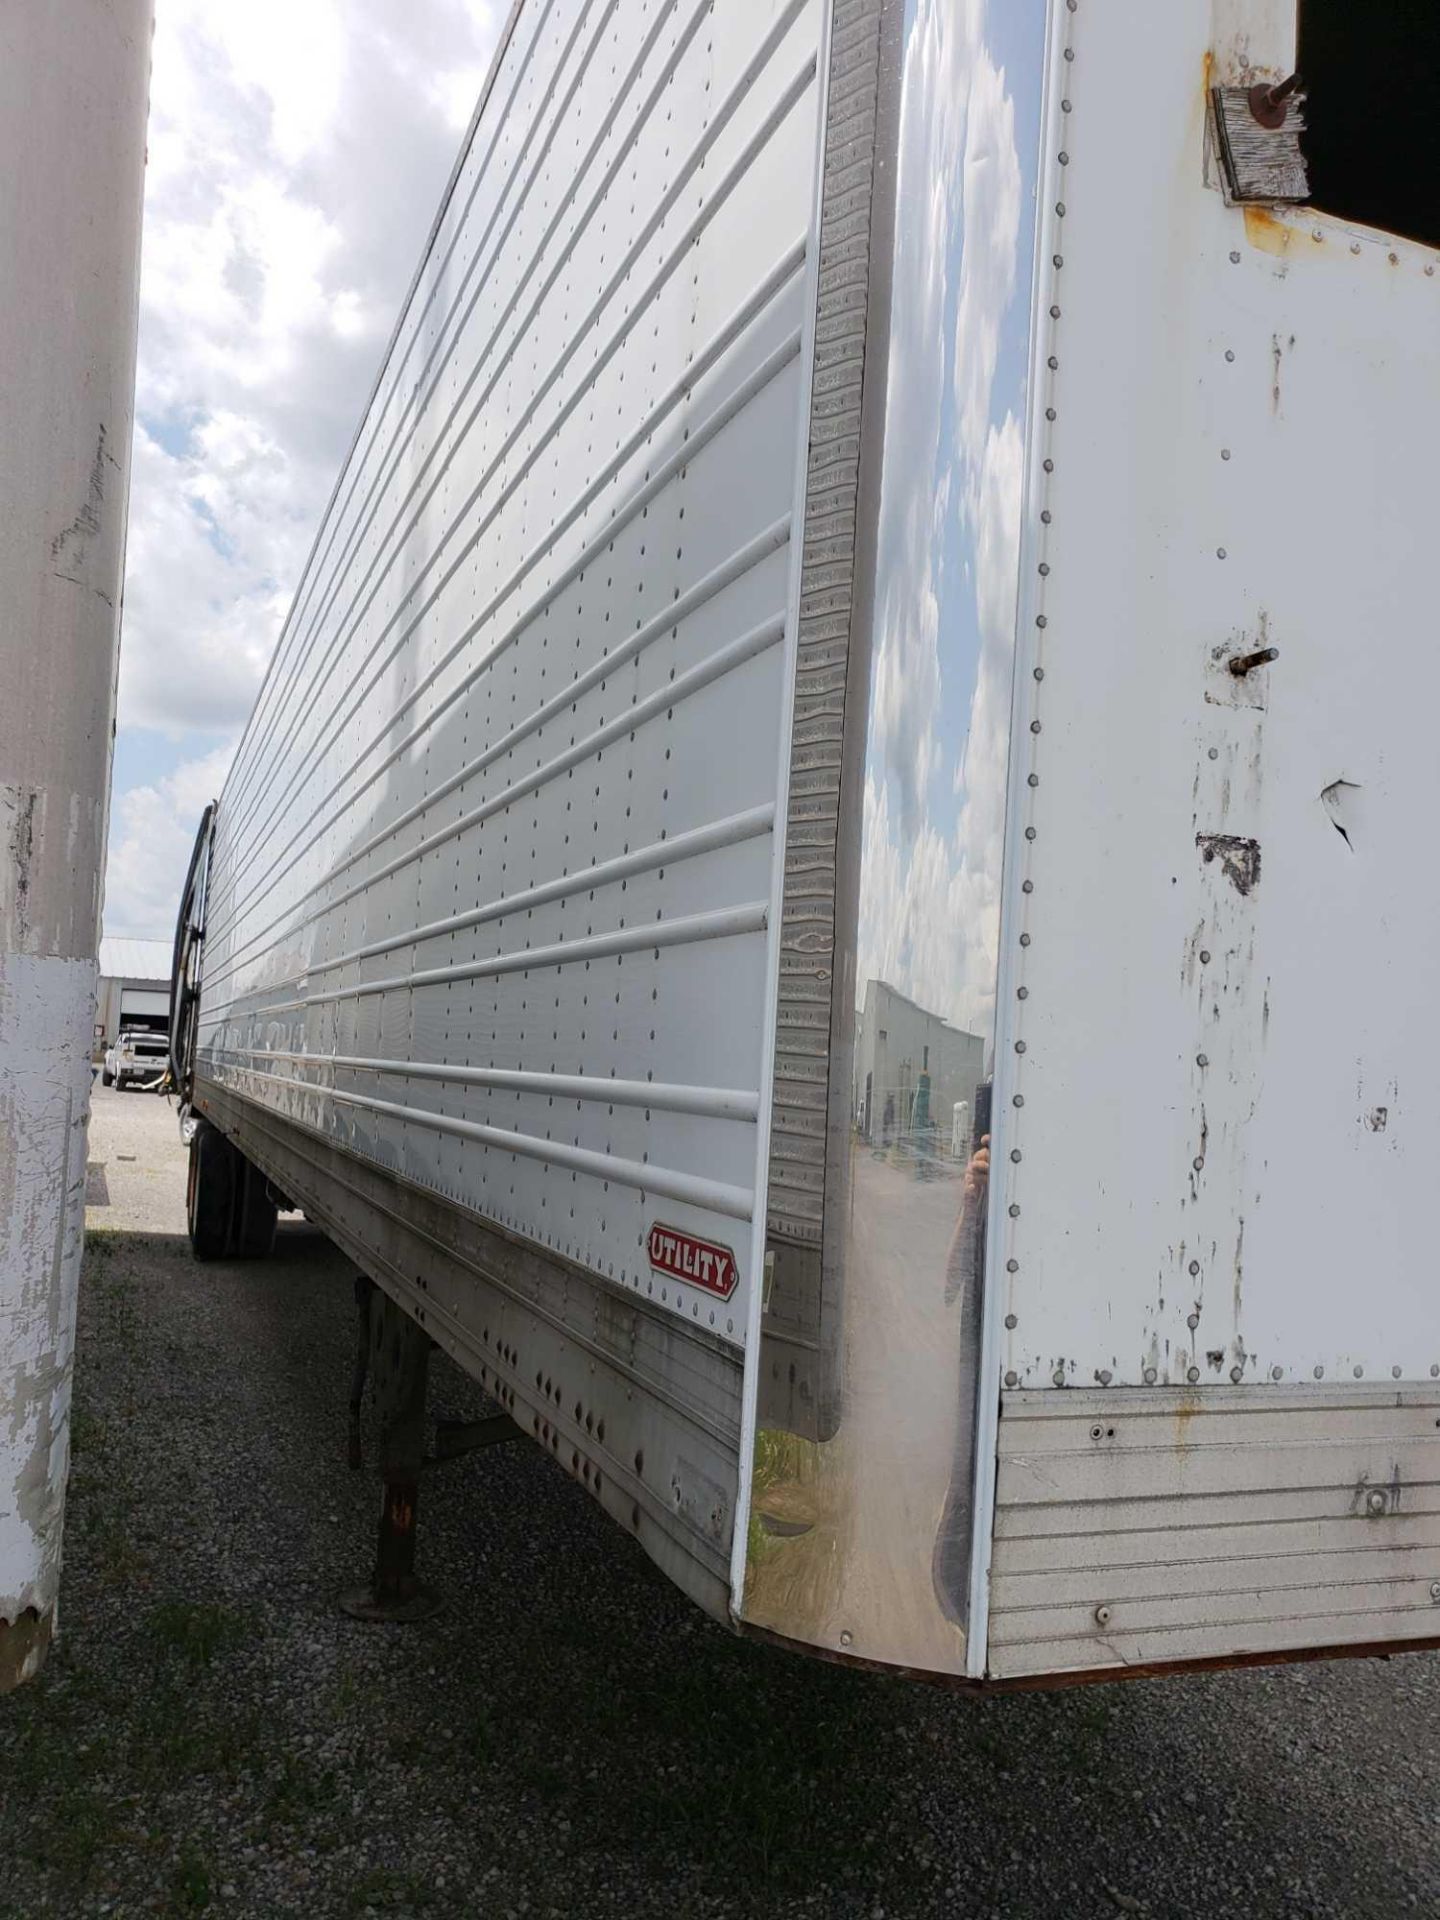 1991 Utility Trailer Company 53" trailer. VIN 1UYVS2480NM655711. Trailer is titled. No reefer unit. - Image 6 of 15